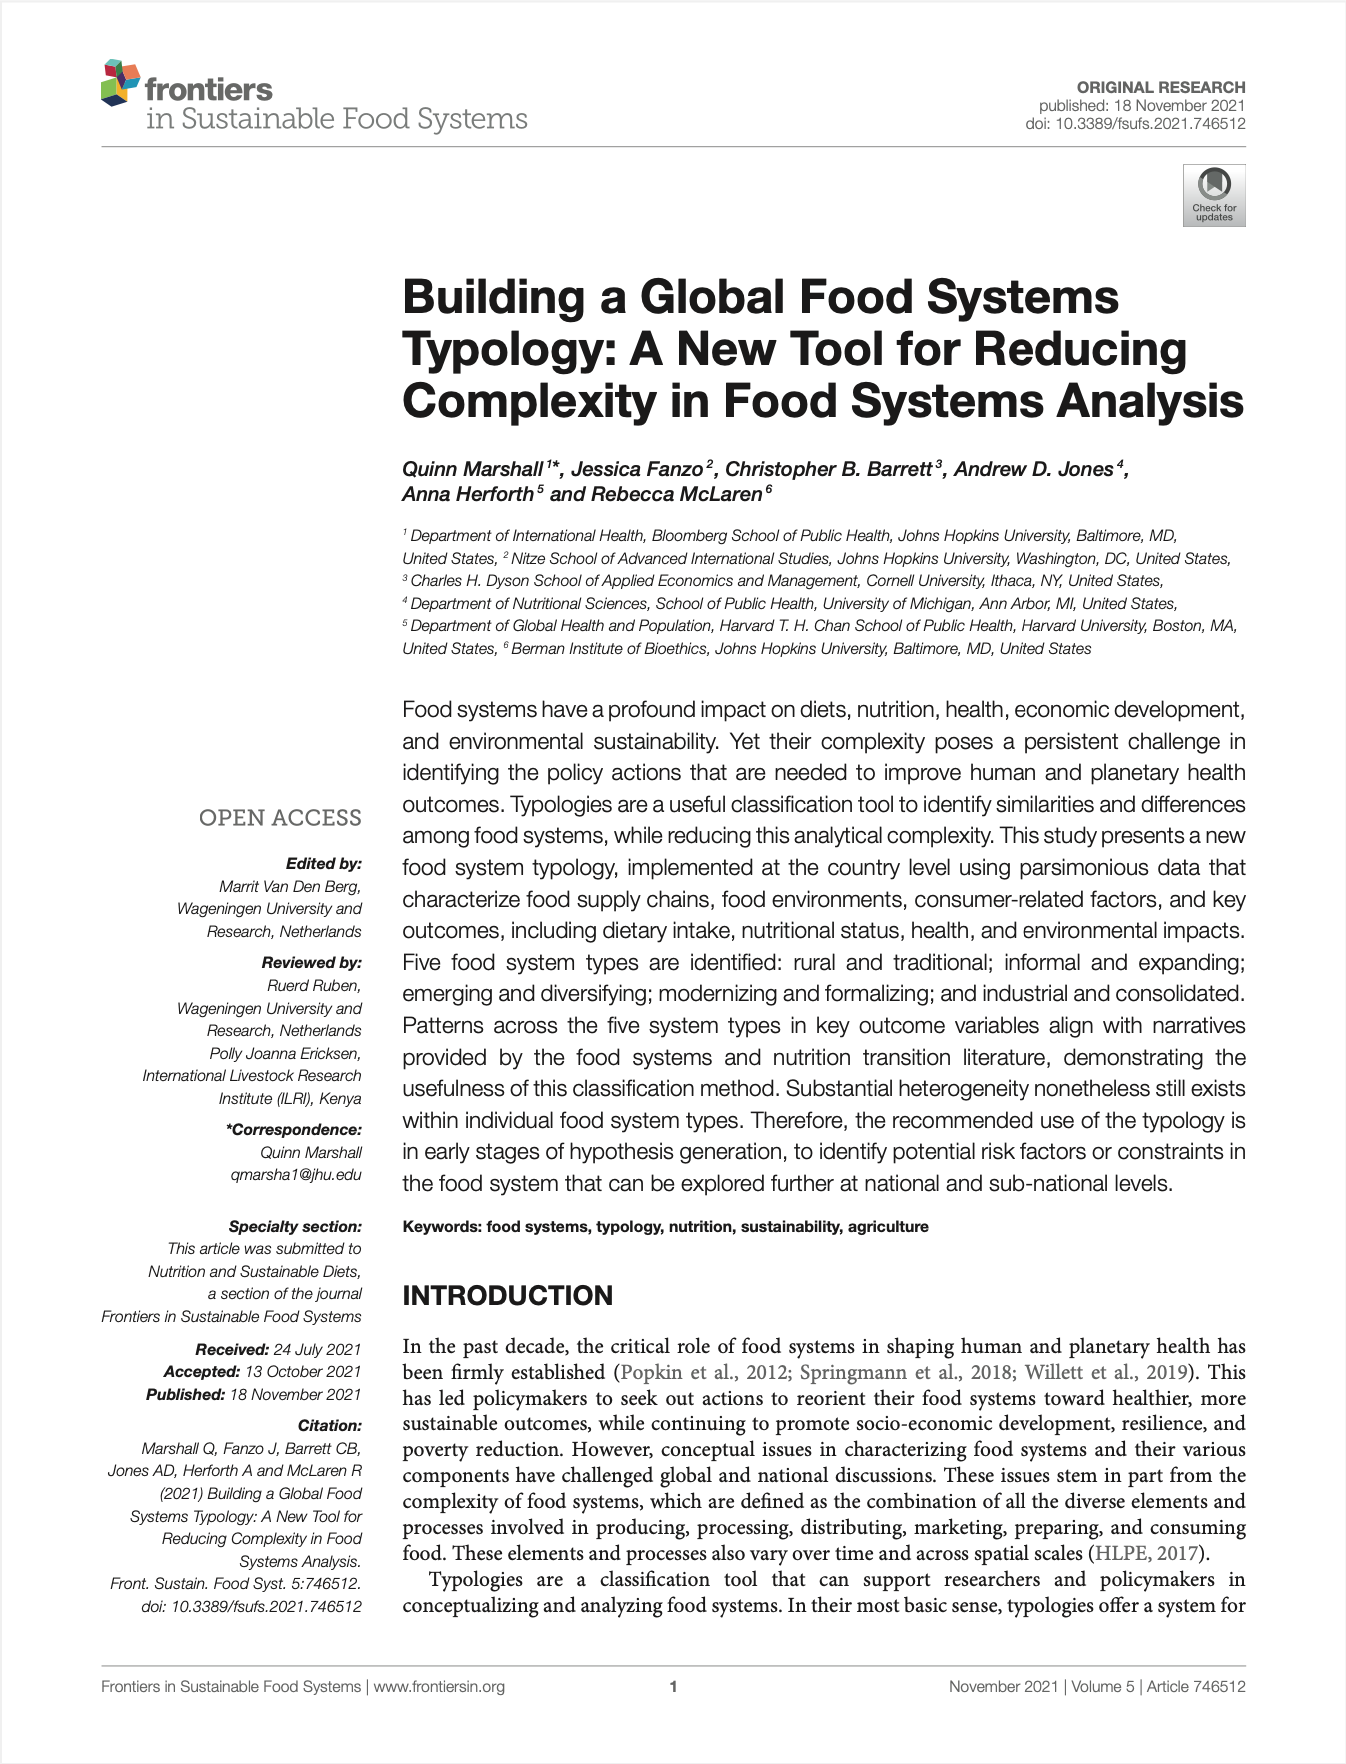 Building a Global Food Systems Typology: A New Tool for Reducing Complexity in Food Systems Analysis